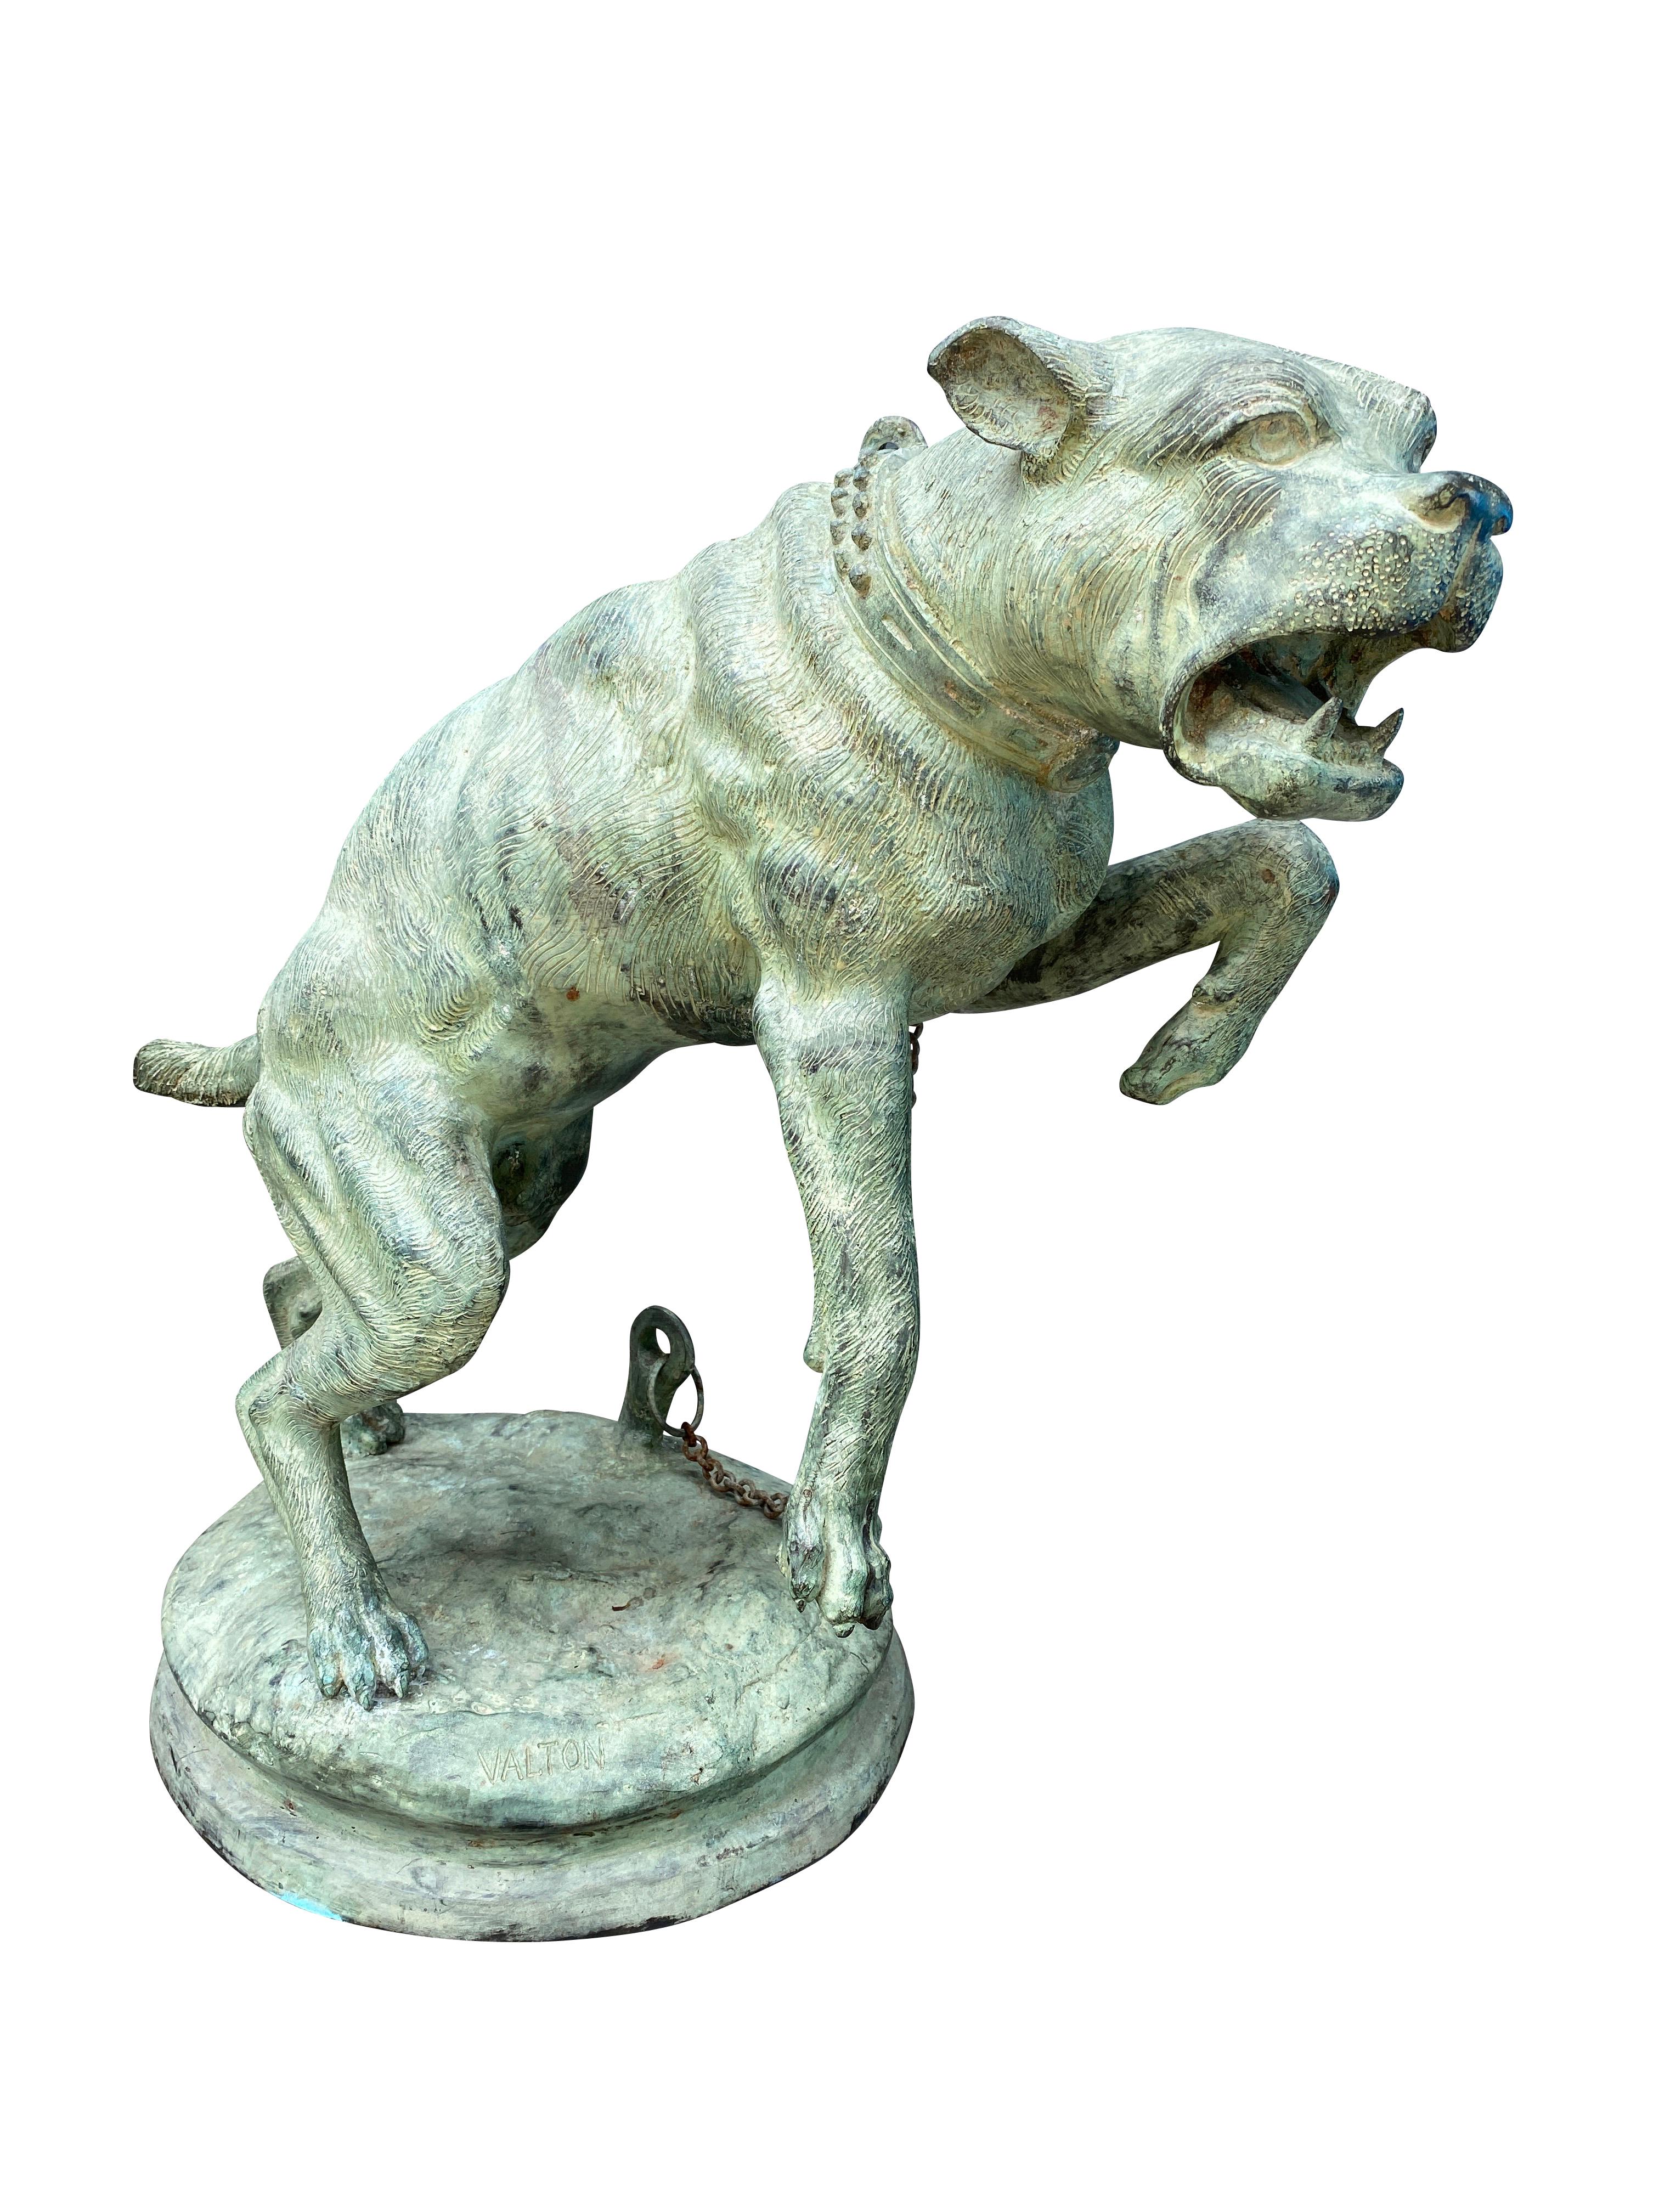 Signed Valton. Mastiff standing with an aggressive pose, chained. On a circular base. A later copy but still with considerable age. Finely cast.